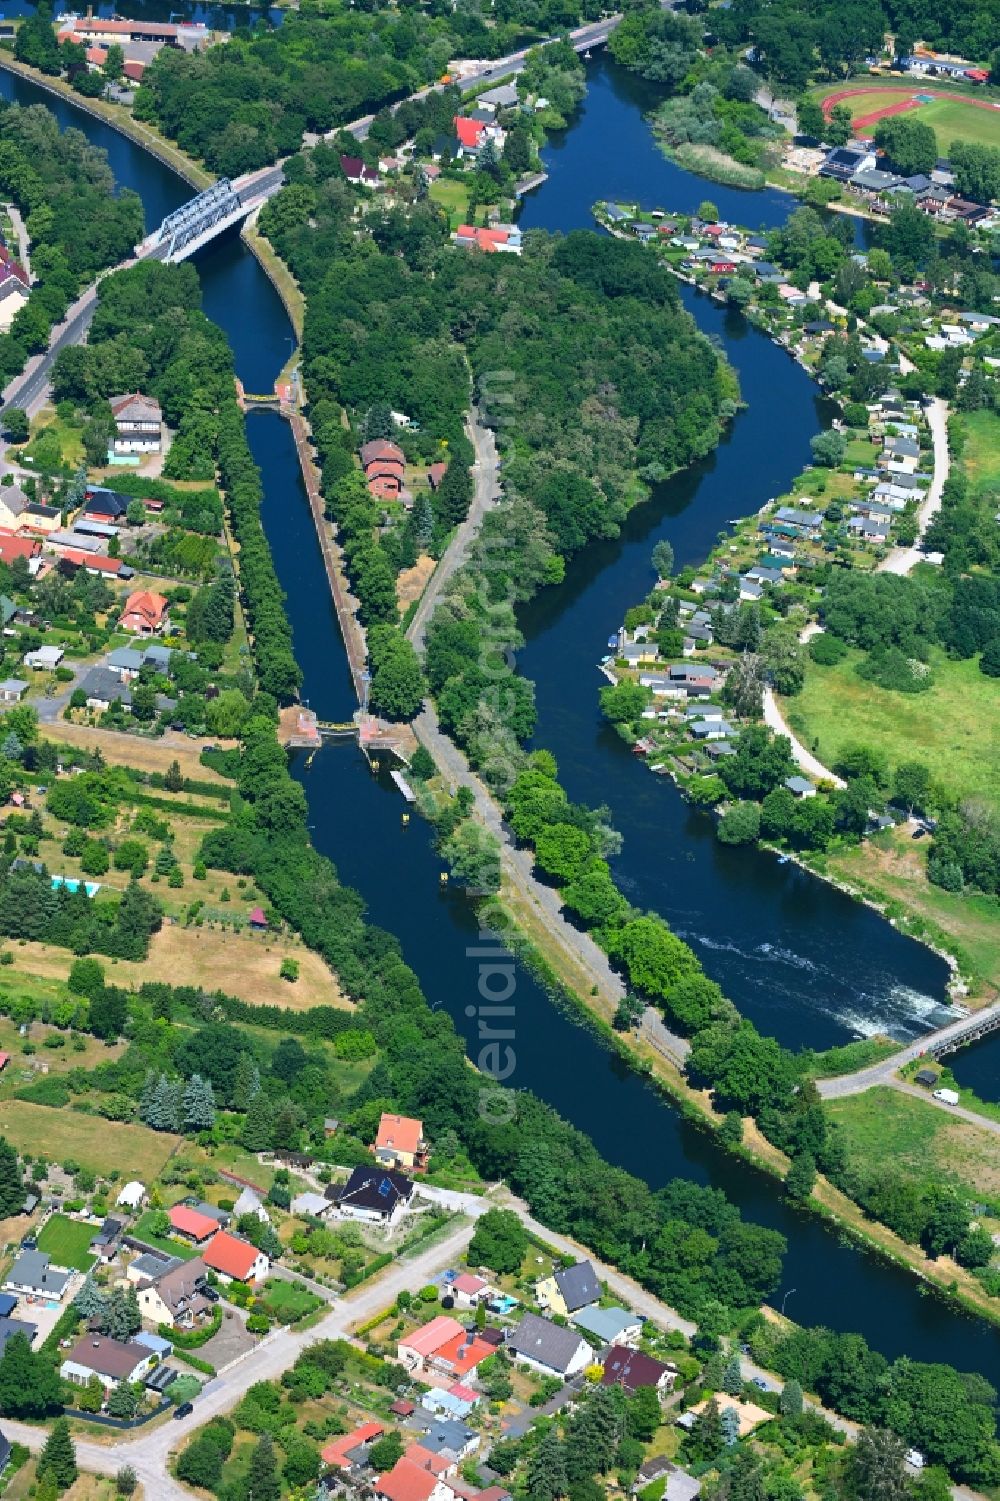 Rathenow from the bird's eye view: Island on the banks of the river course the Havel in Rathenow in the state Brandenburg, Germany